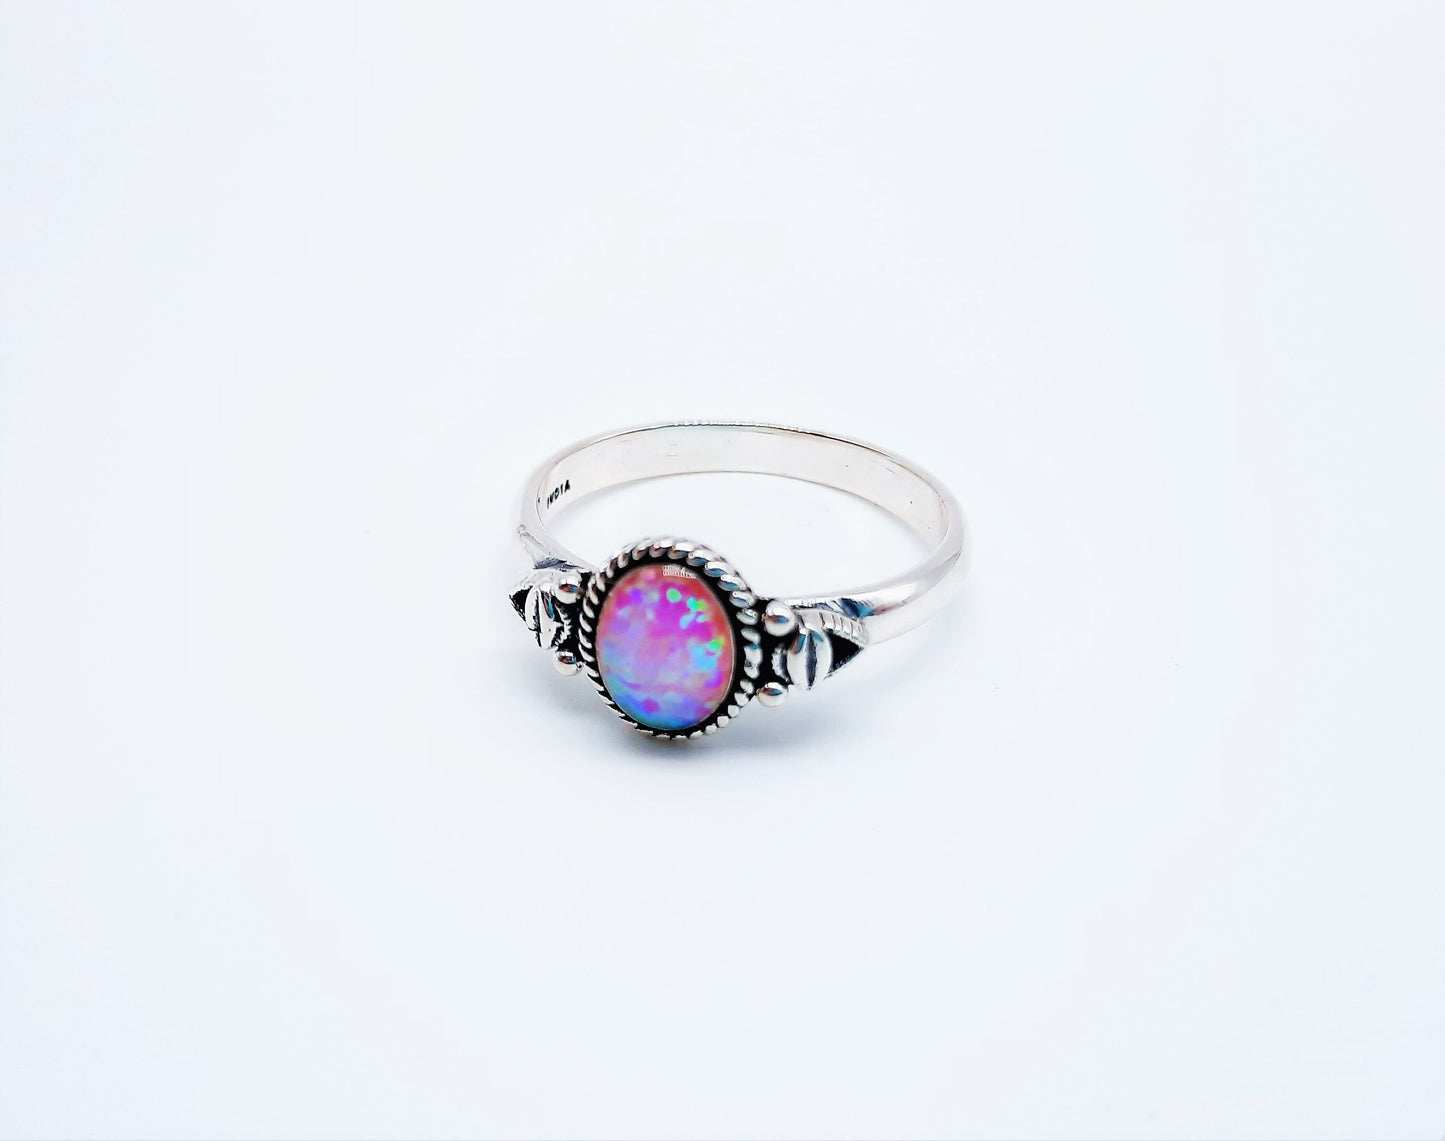 Handcrafted / Handmade Intricate Antiqued 925 Sterling Silver Ring, Genuine Pink Opal Stone, Domed with Holographic Resin